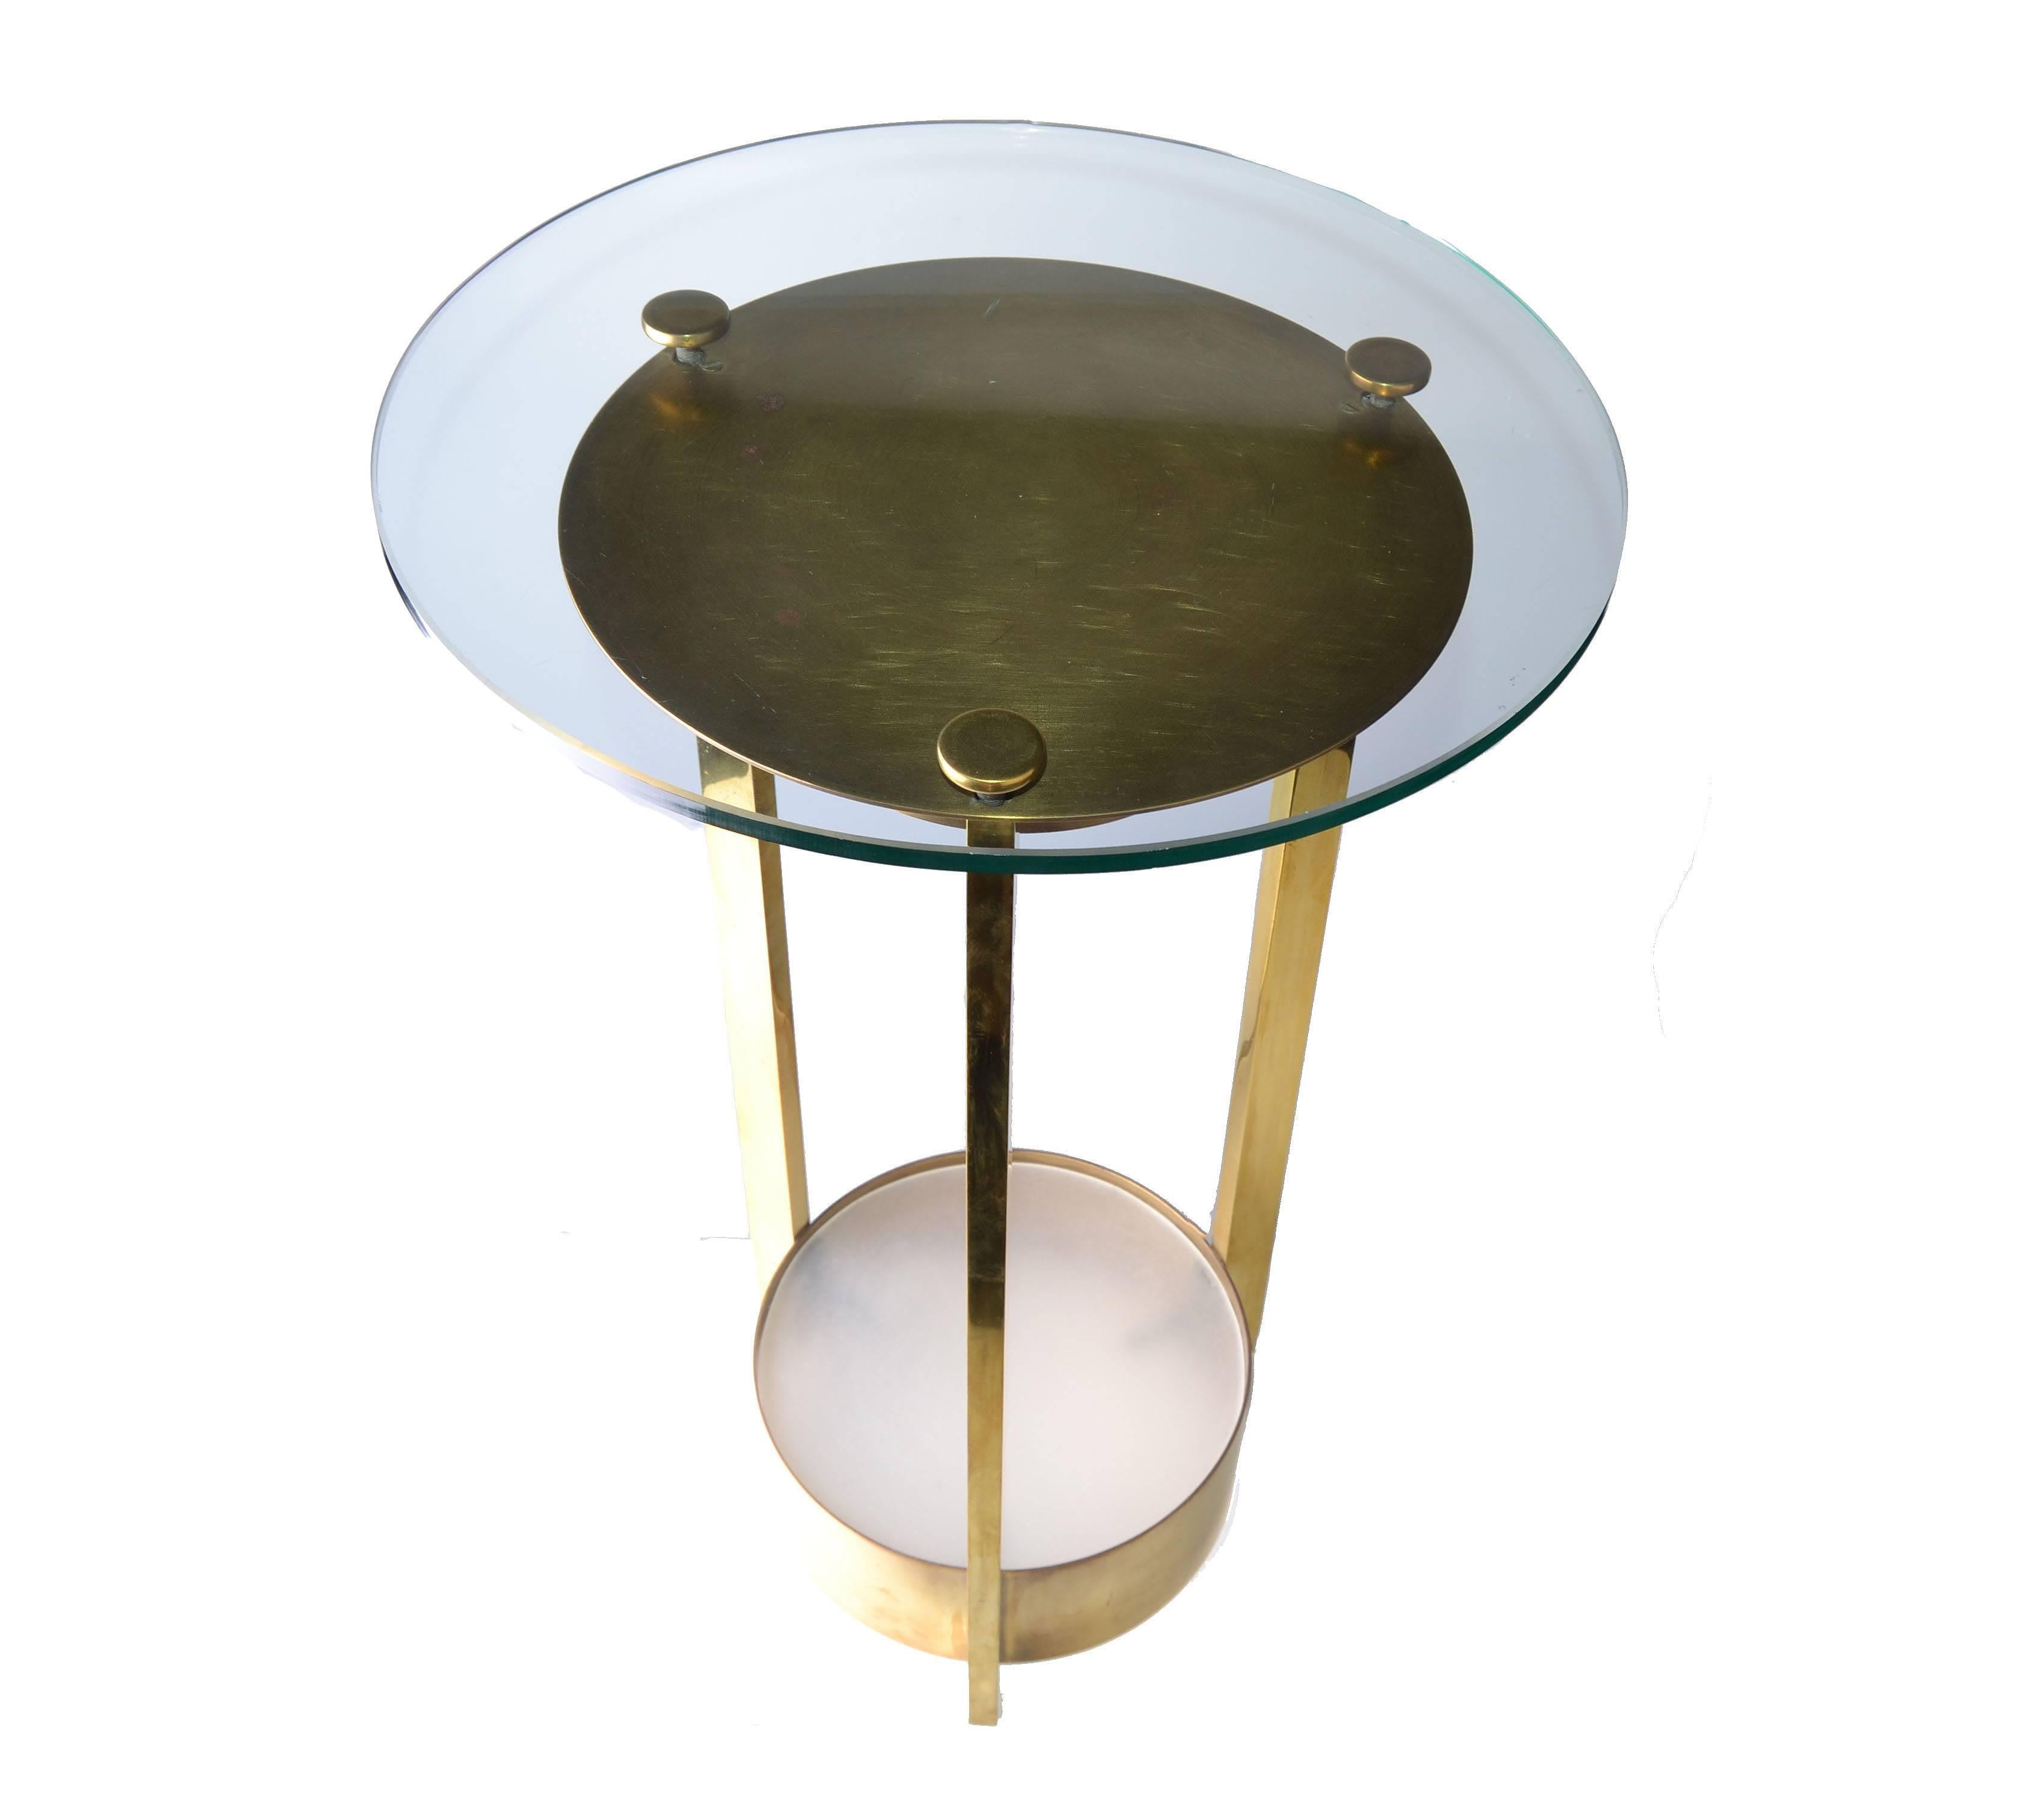 Dorothy Thorpe illuminated brass and glass side table. Solid brushed brass round glass side table with light at the top. Bottom stand is frosted glass. Socket is ceramic. 40 wattage of light bulb.